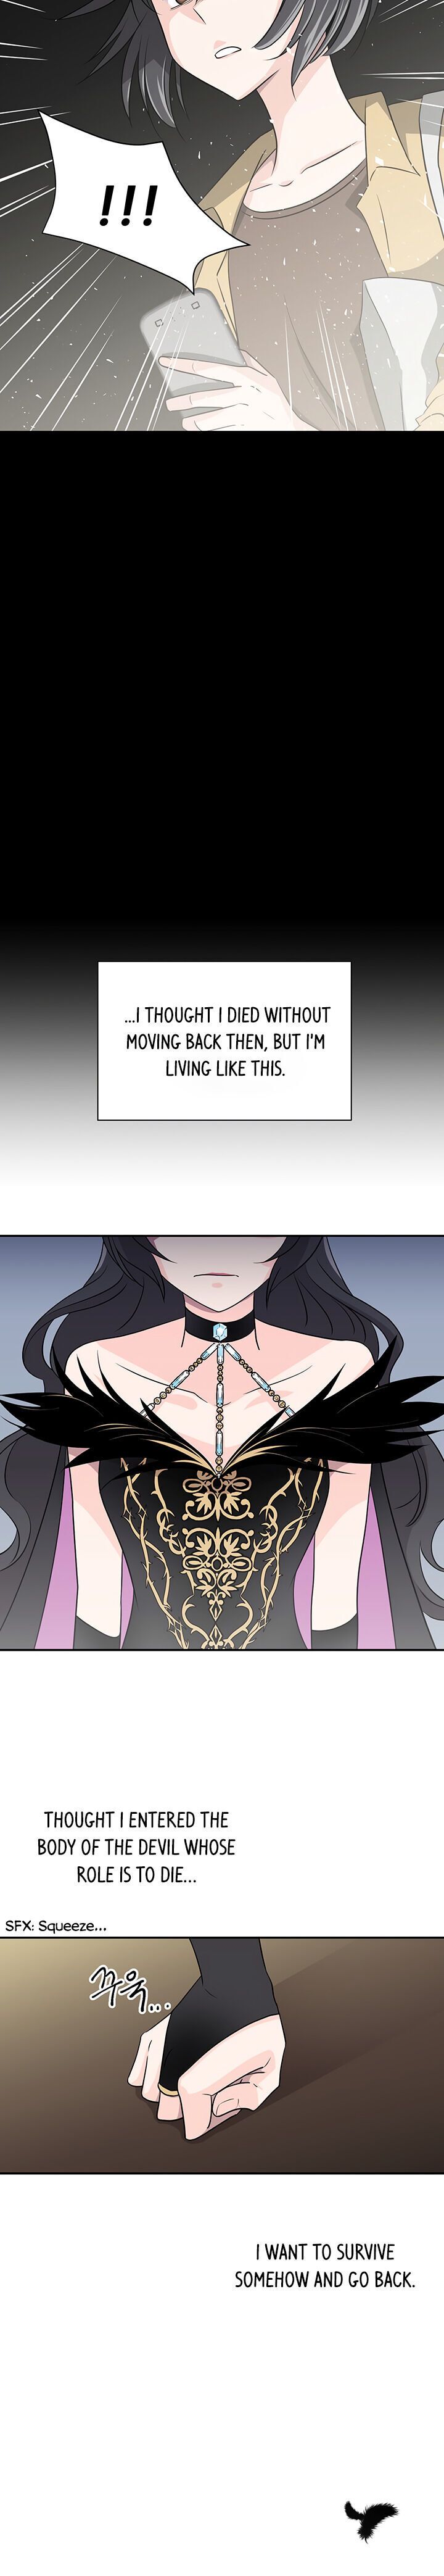 When I Opened My Eyes, I Had Become The Devil Chapter 1 - Page 12